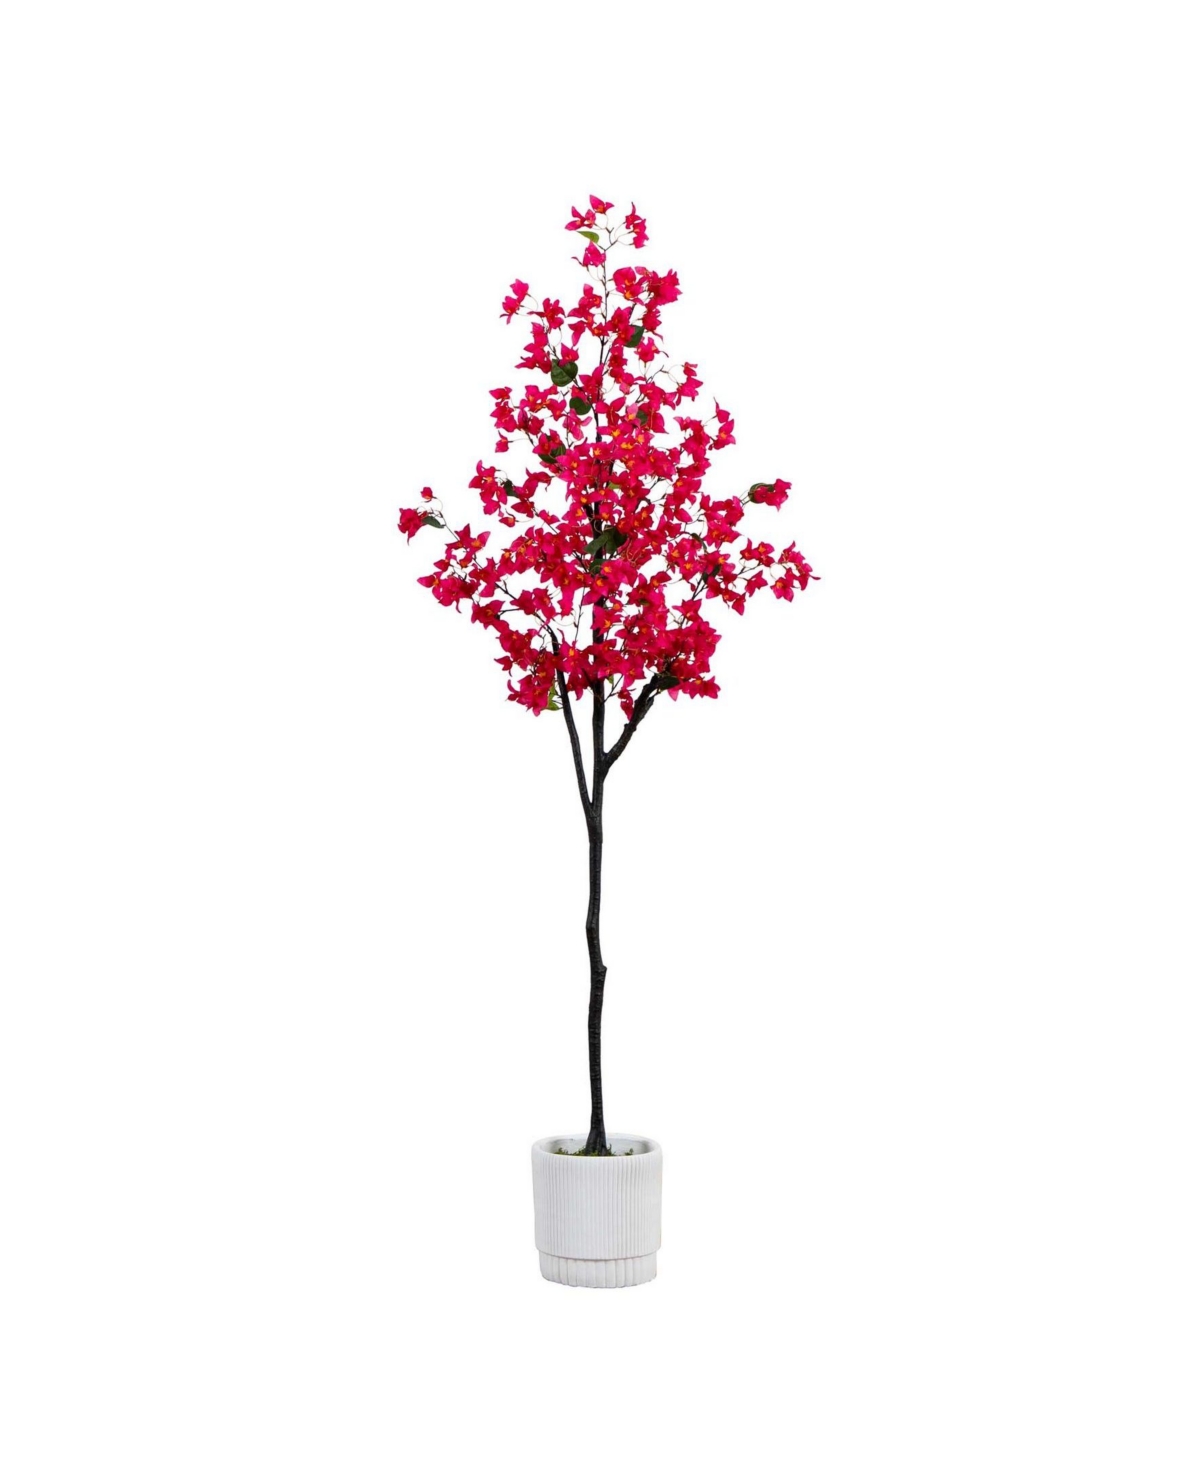 6ft. Artificial Bougainvillea Tree with White Decorative Planter - Pink